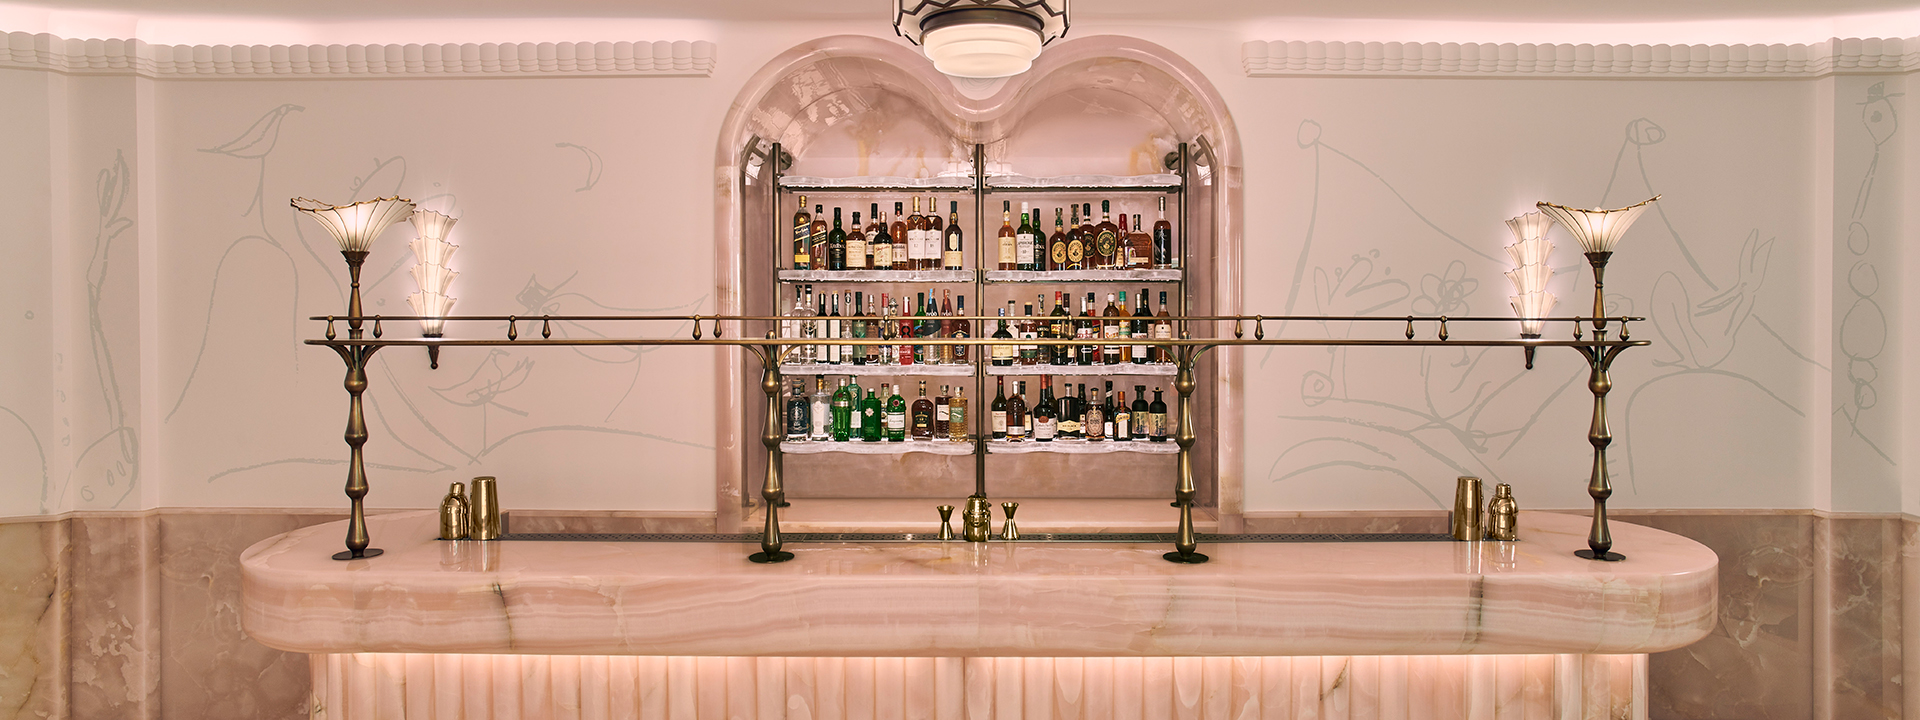 An image of The Painter's Room Bar at Claridge's in London. The image shows the bar and shelves of alcohol behind in. 